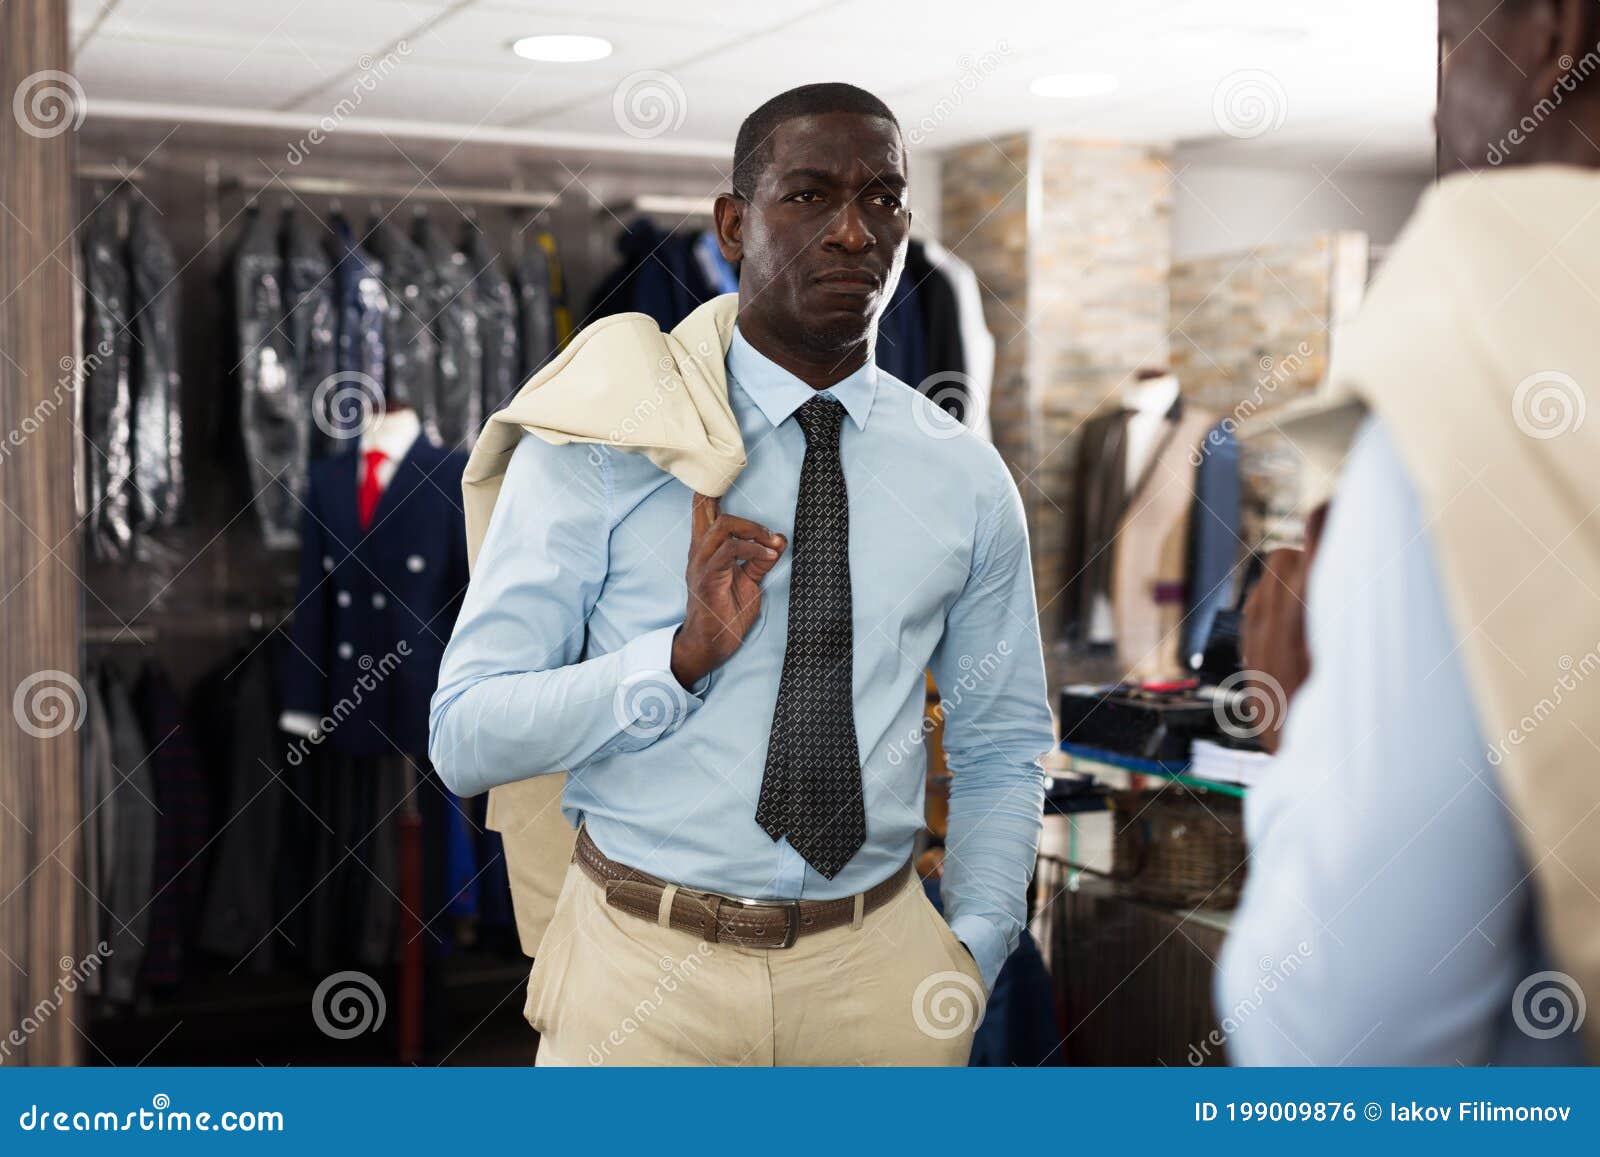 Confident Male Customer Choosing Fashion Beige Suit in Mens Store Stock ...